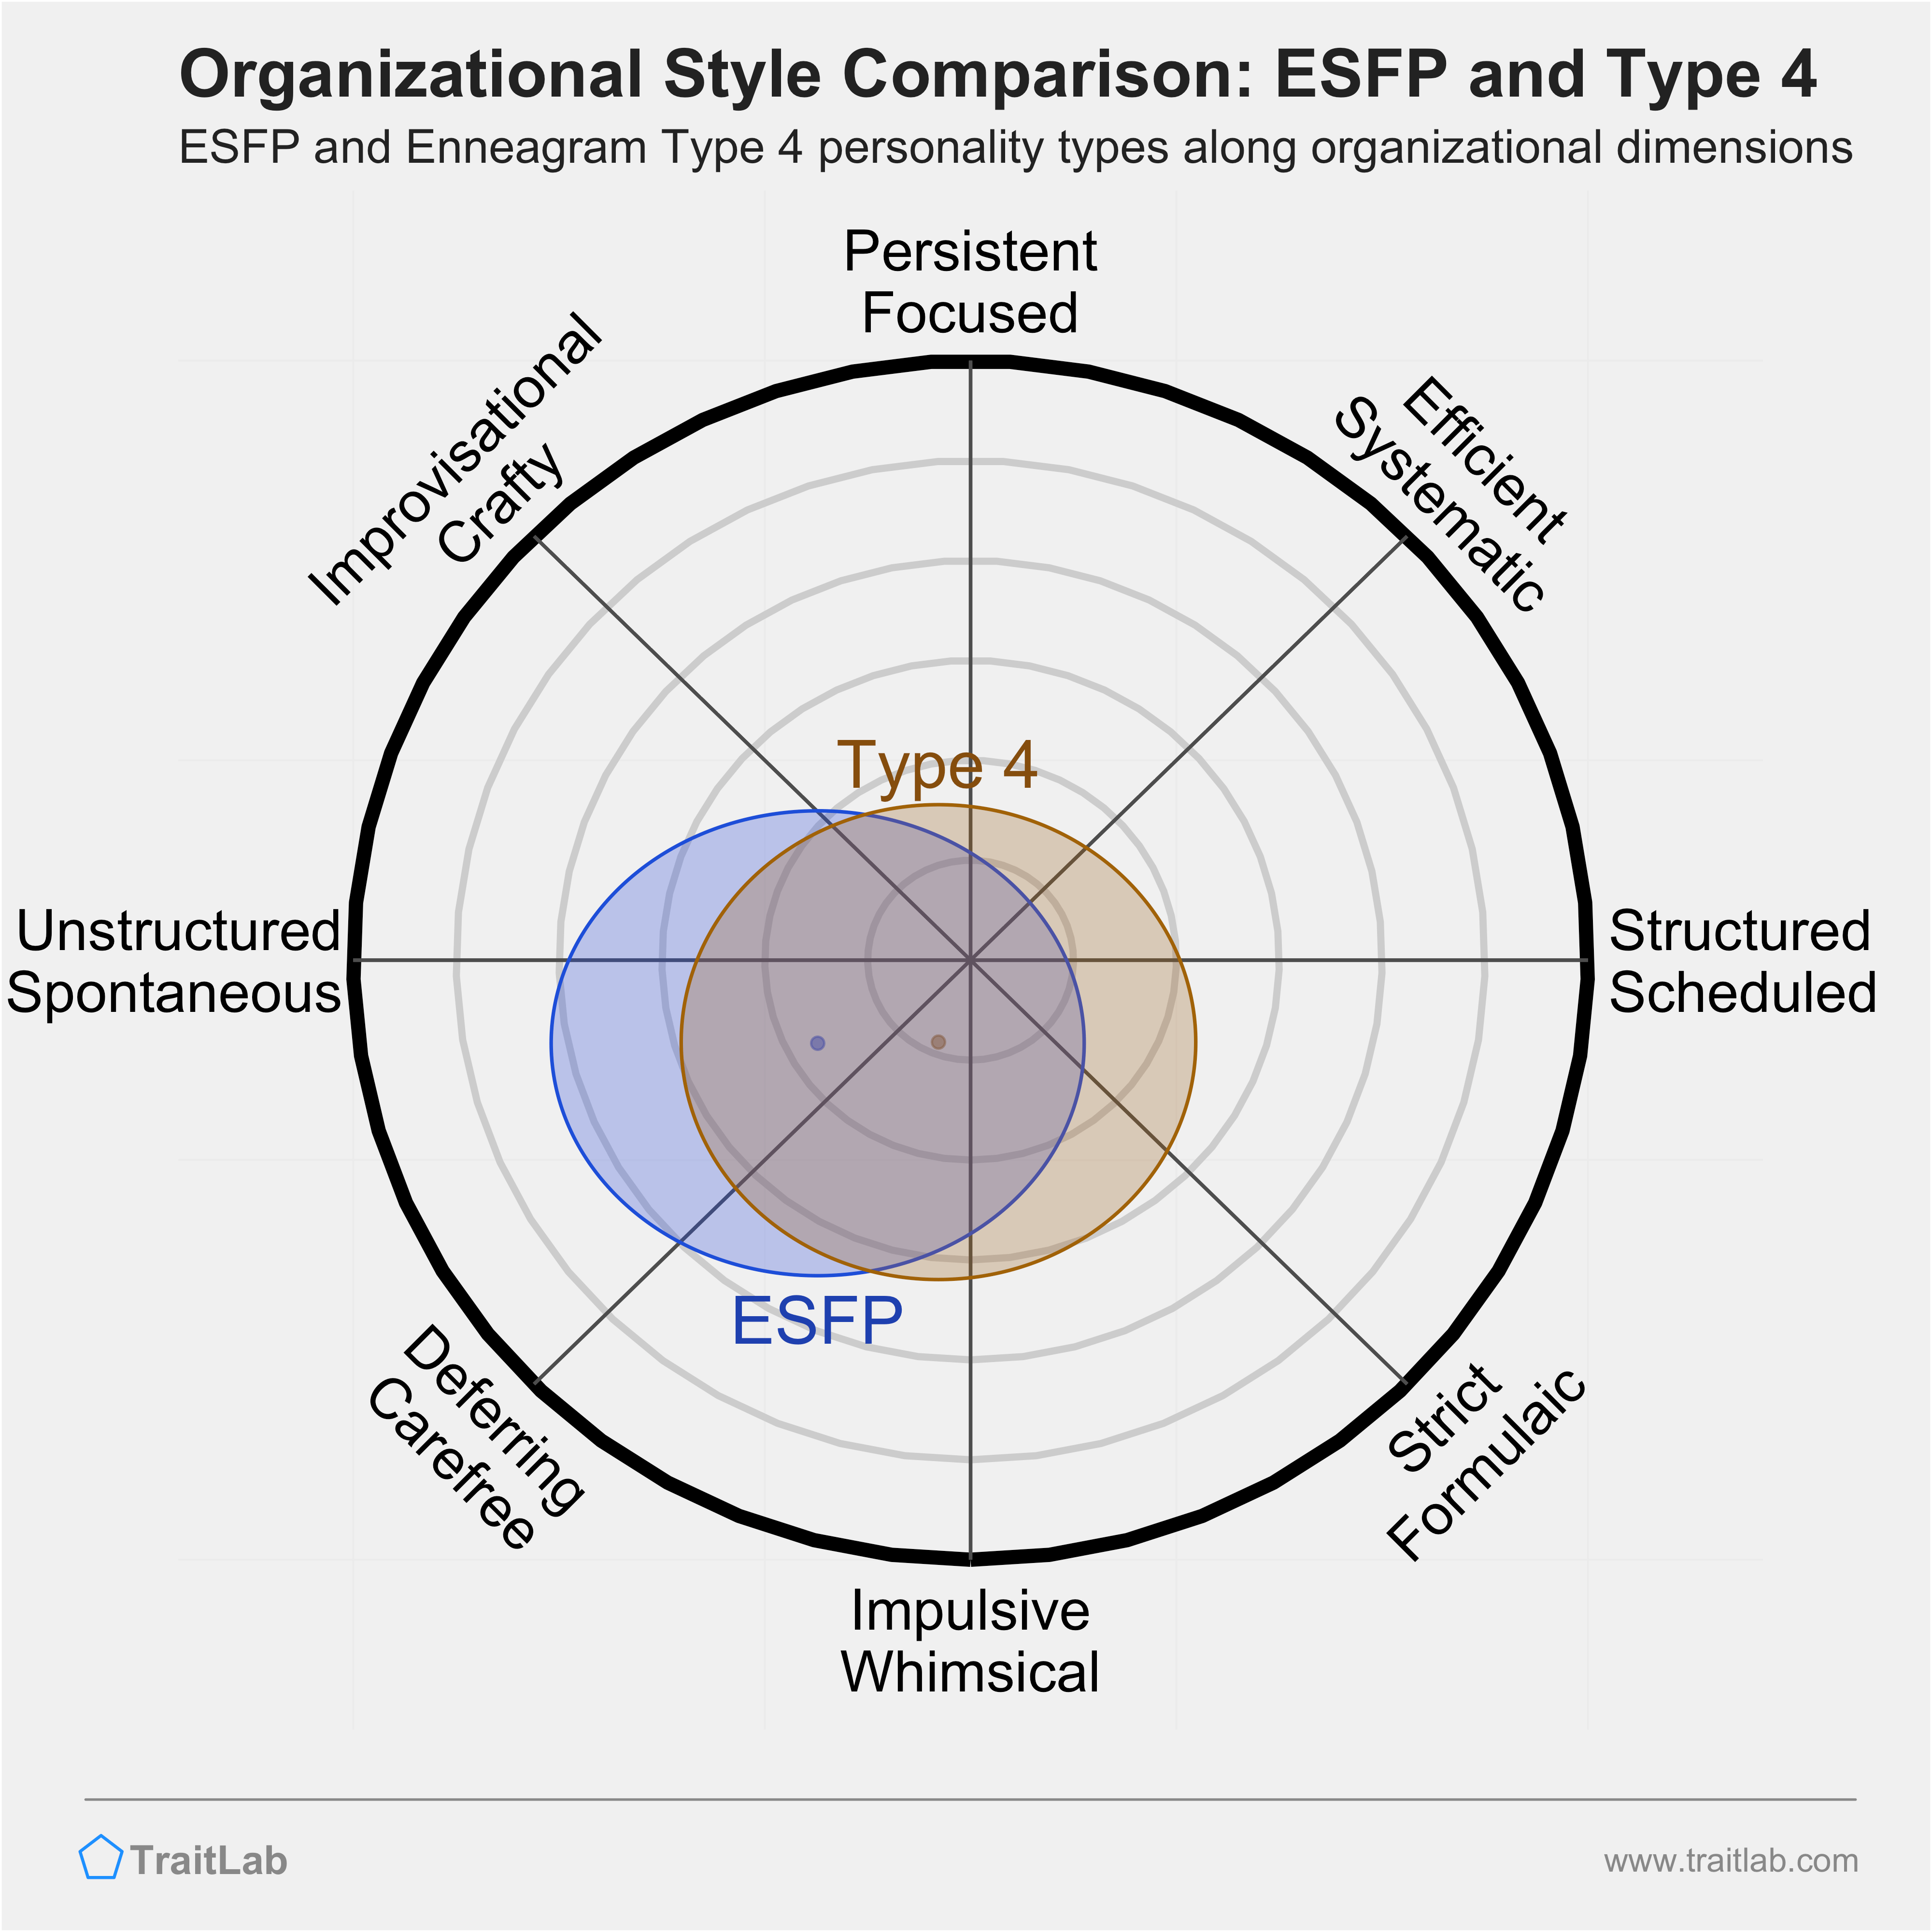 ESFP and Type 4 comparison across organizational dimensions